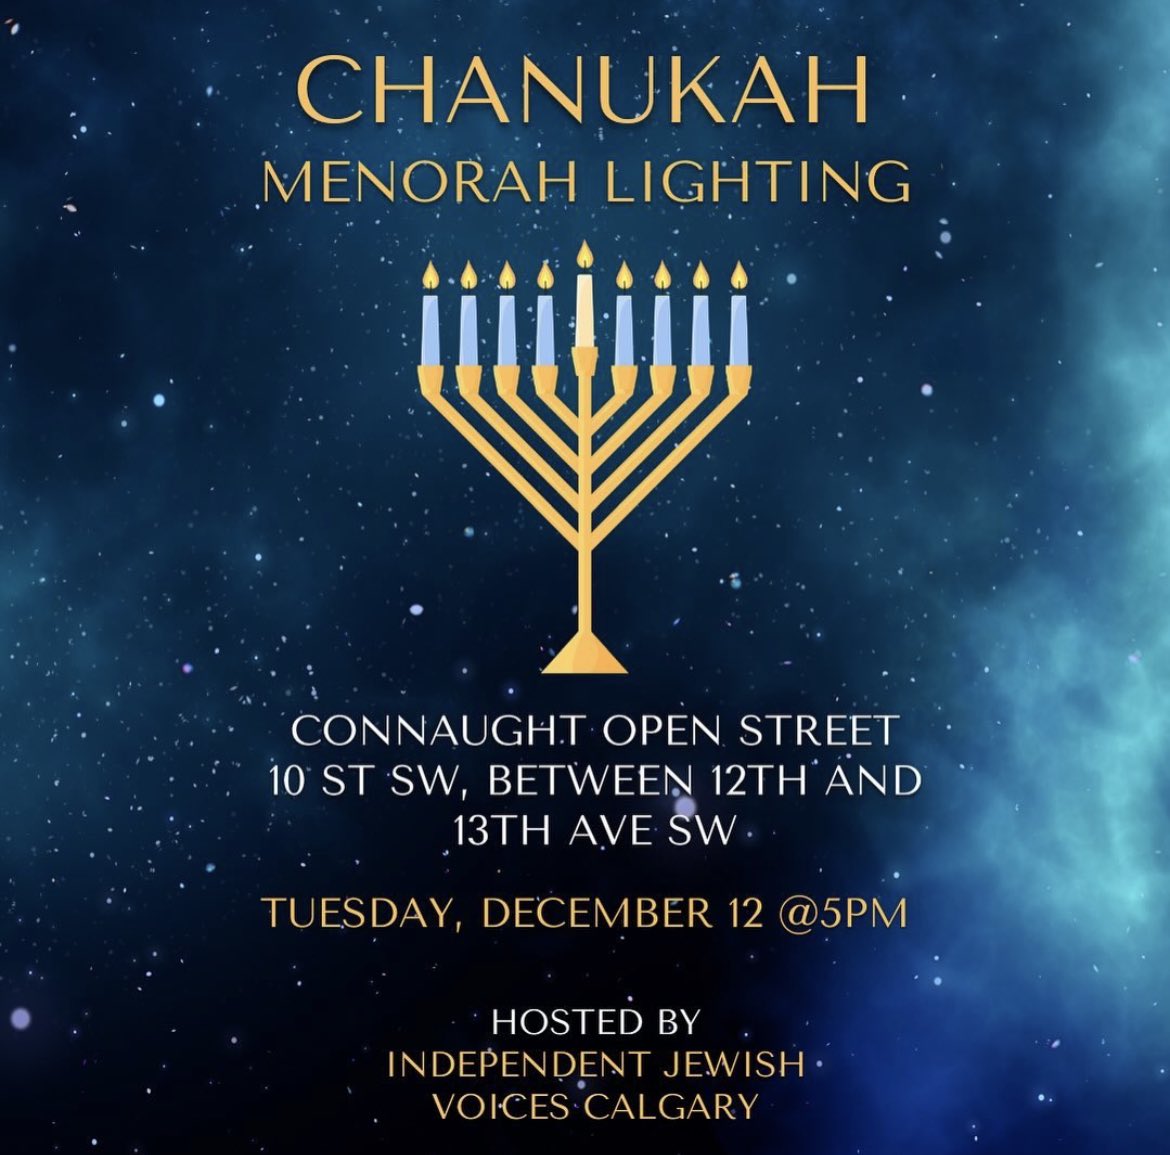 Independent Jewish Voices Calgary is hosting a menorah lighting event for the community this Tuesday. ✨ALL ARE WELCOME TO ATTEND✨ Happening at Connaught Open Street (10th Street SW between 12+13 Ave) Tuesday, Dec 12th beginning at 5pm.